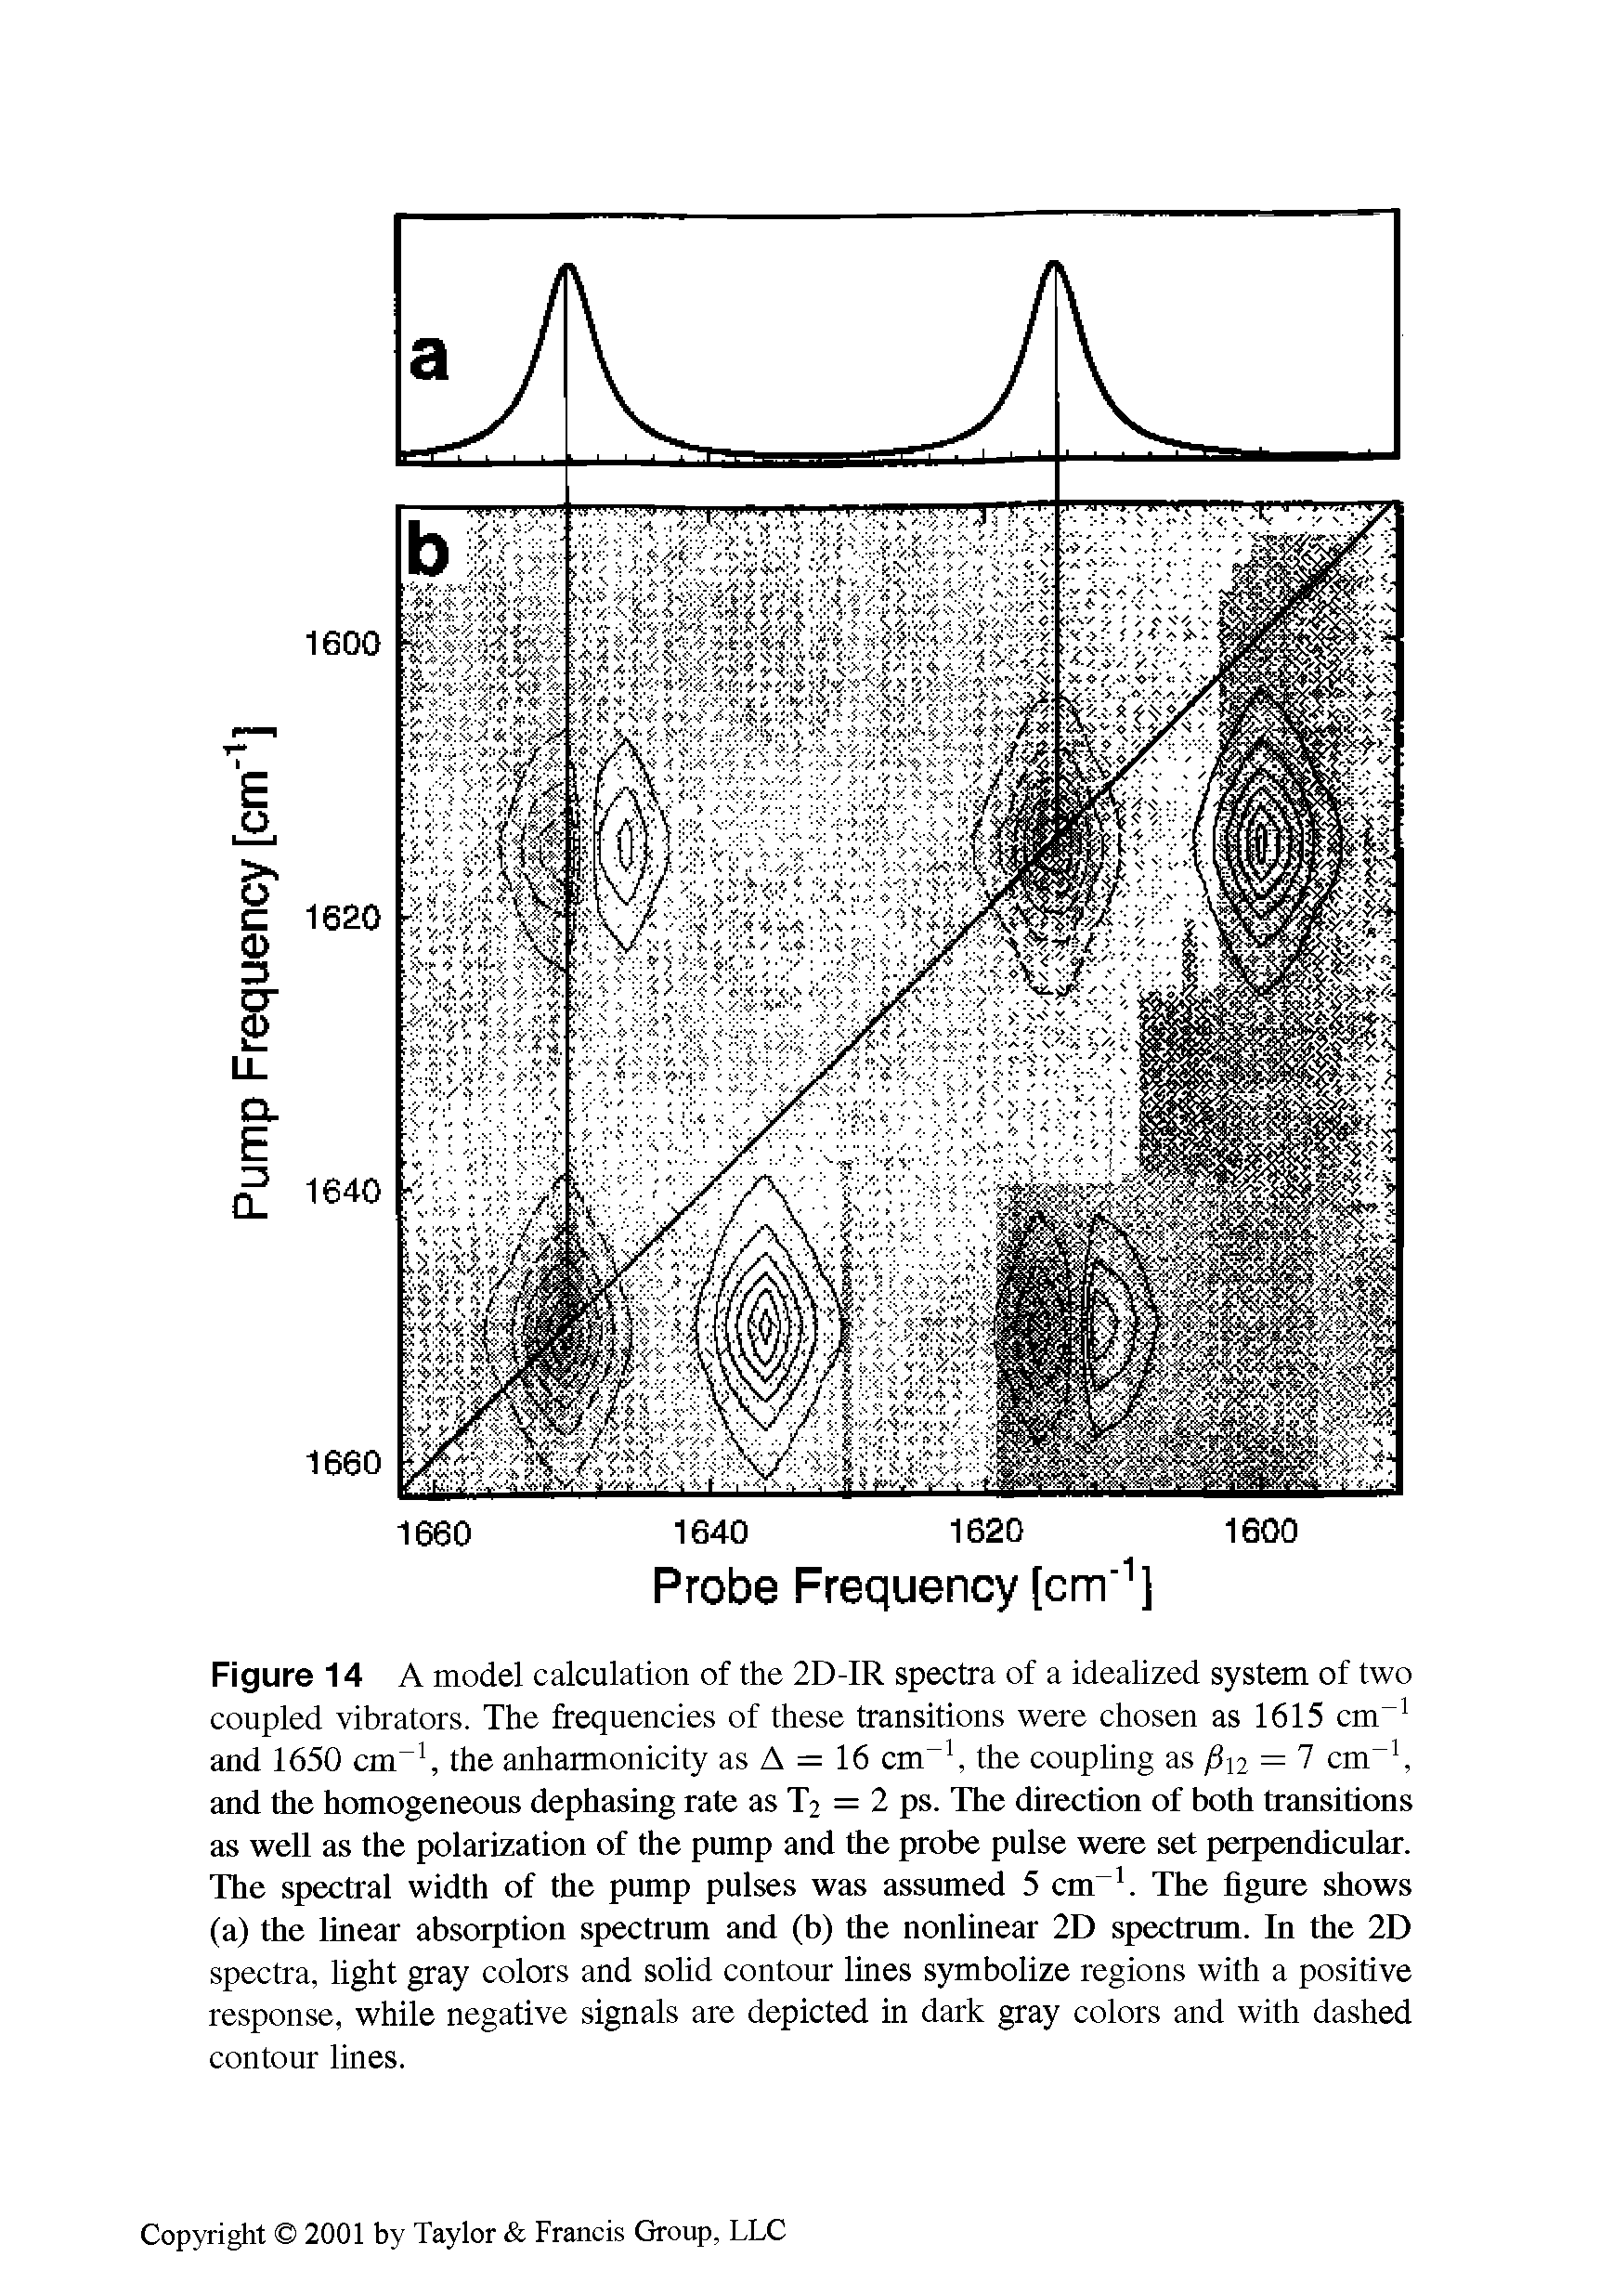 Figure 14 A model calculation of the 2D-IR spectra of a idealized system of two coupled vibrators. The frequencies of these transitions were chosen as 1615 cm-1 and 1650 cm-1, the anharmonicity as A = 16 cm the coupling as = 7 cm and the homogeneous dephasing rate as T2 = 2 ps. The direction of both transitions as well as the polarization of the pump and the probe pulse were set perpendicular. The spectral width of the pump pulses was assumed 5 cm-1. The figure shows (a) the linear absorption spectrum and (b) the nonlinear 2D spectrum. In the 2D spectra, light gray colors and solid contour lines symbolize regions with a positive response, while negative signals are depicted in dark gray colors and with dashed contour lines.